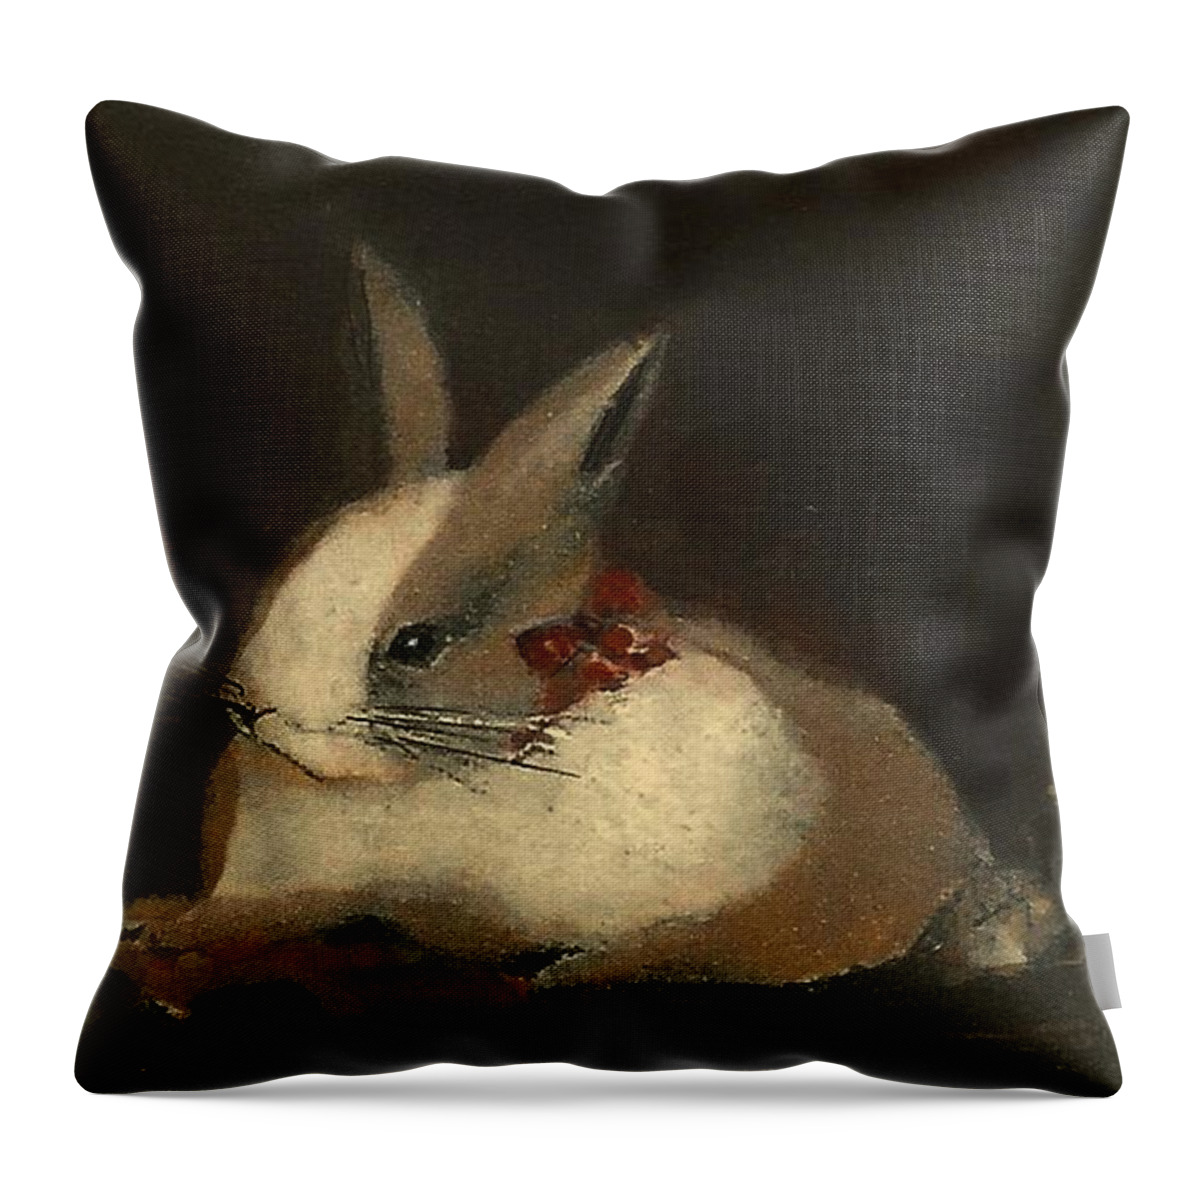 Fine Art America.com Throw Pillow featuring the painting Christmas Rabbit by Diane Strain